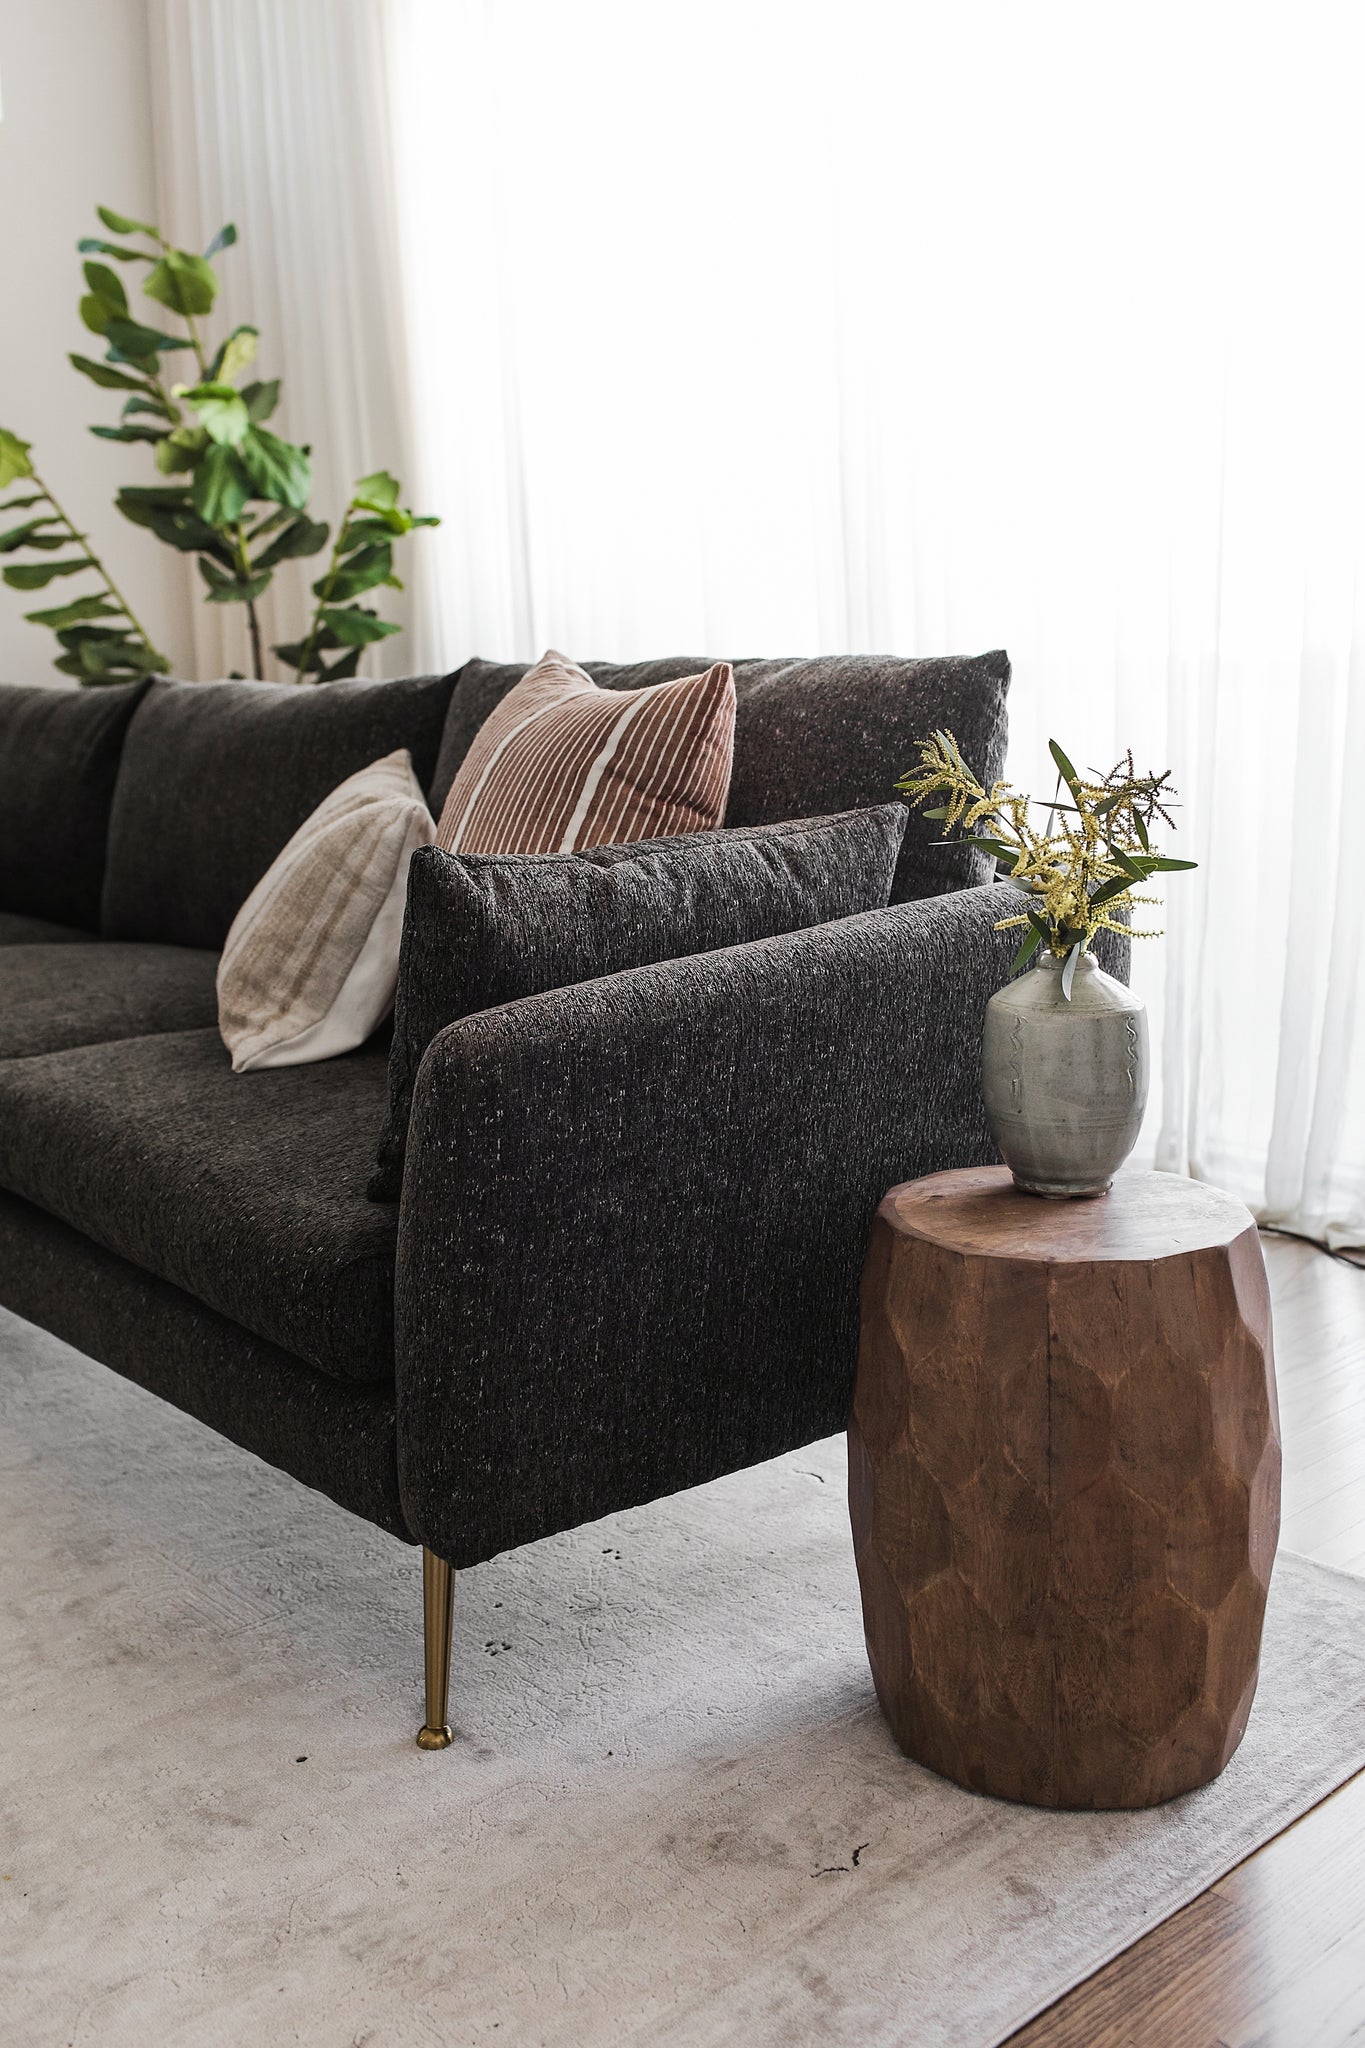 park sectional sofa shown in charcoal with gold legs with black legs left facing